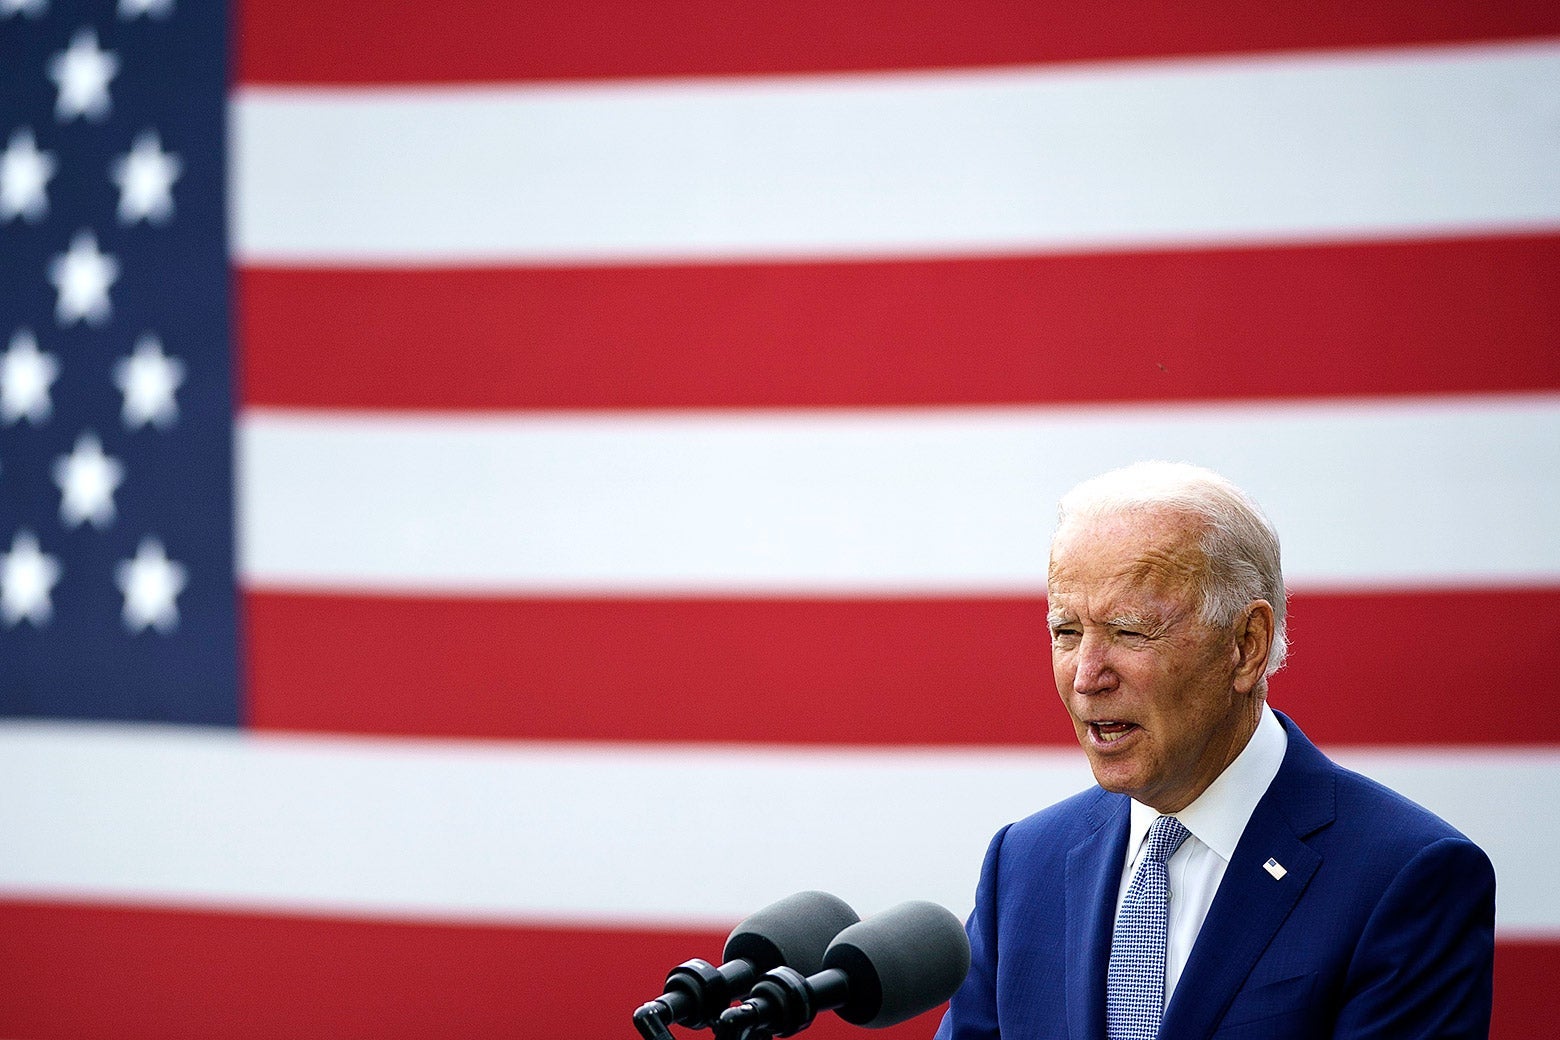 Joe Biden speaks into two microphones while standing in front of a U.S. flag.